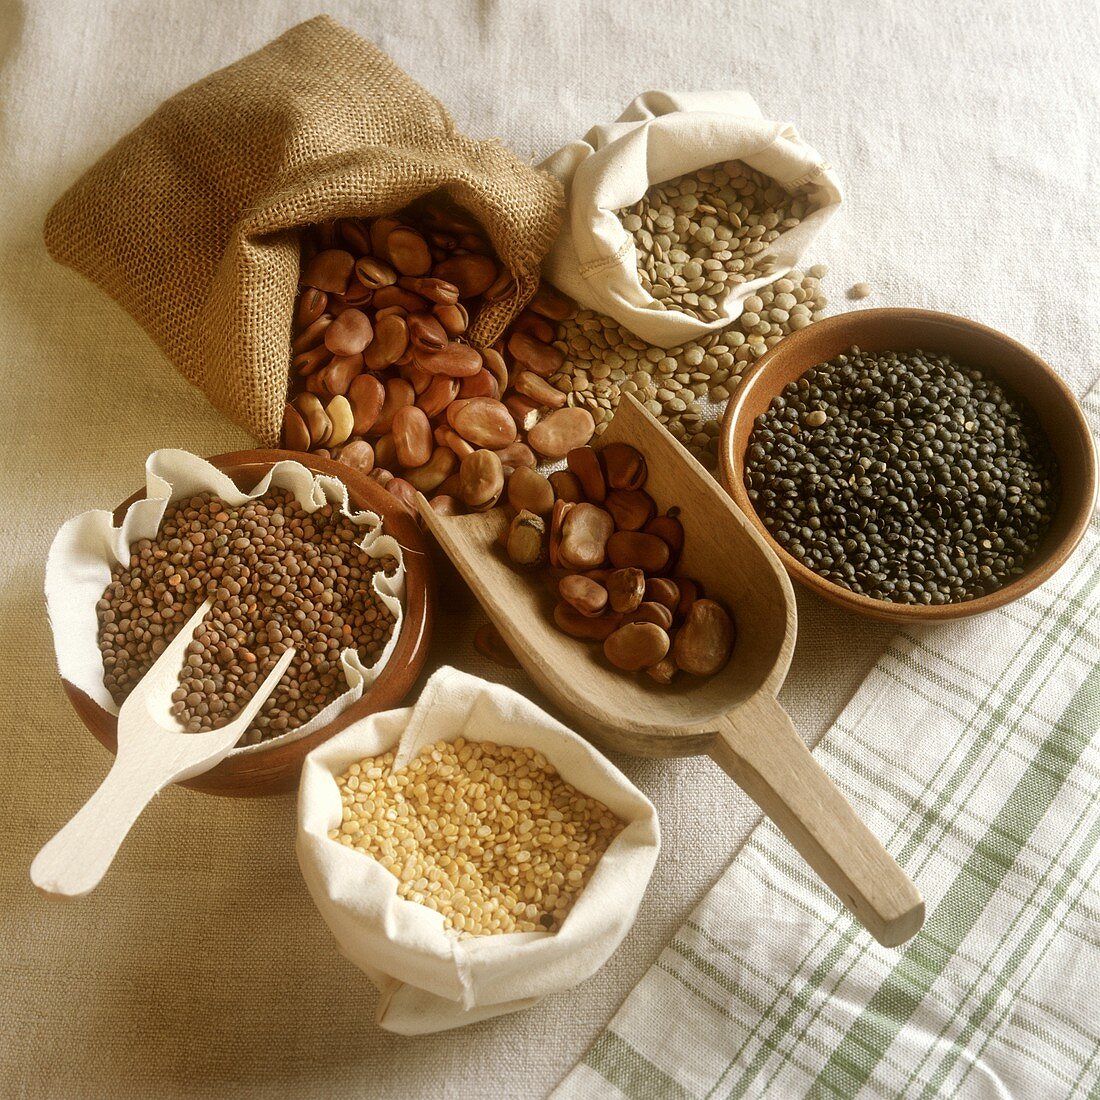 Various pulses in bowls and bags